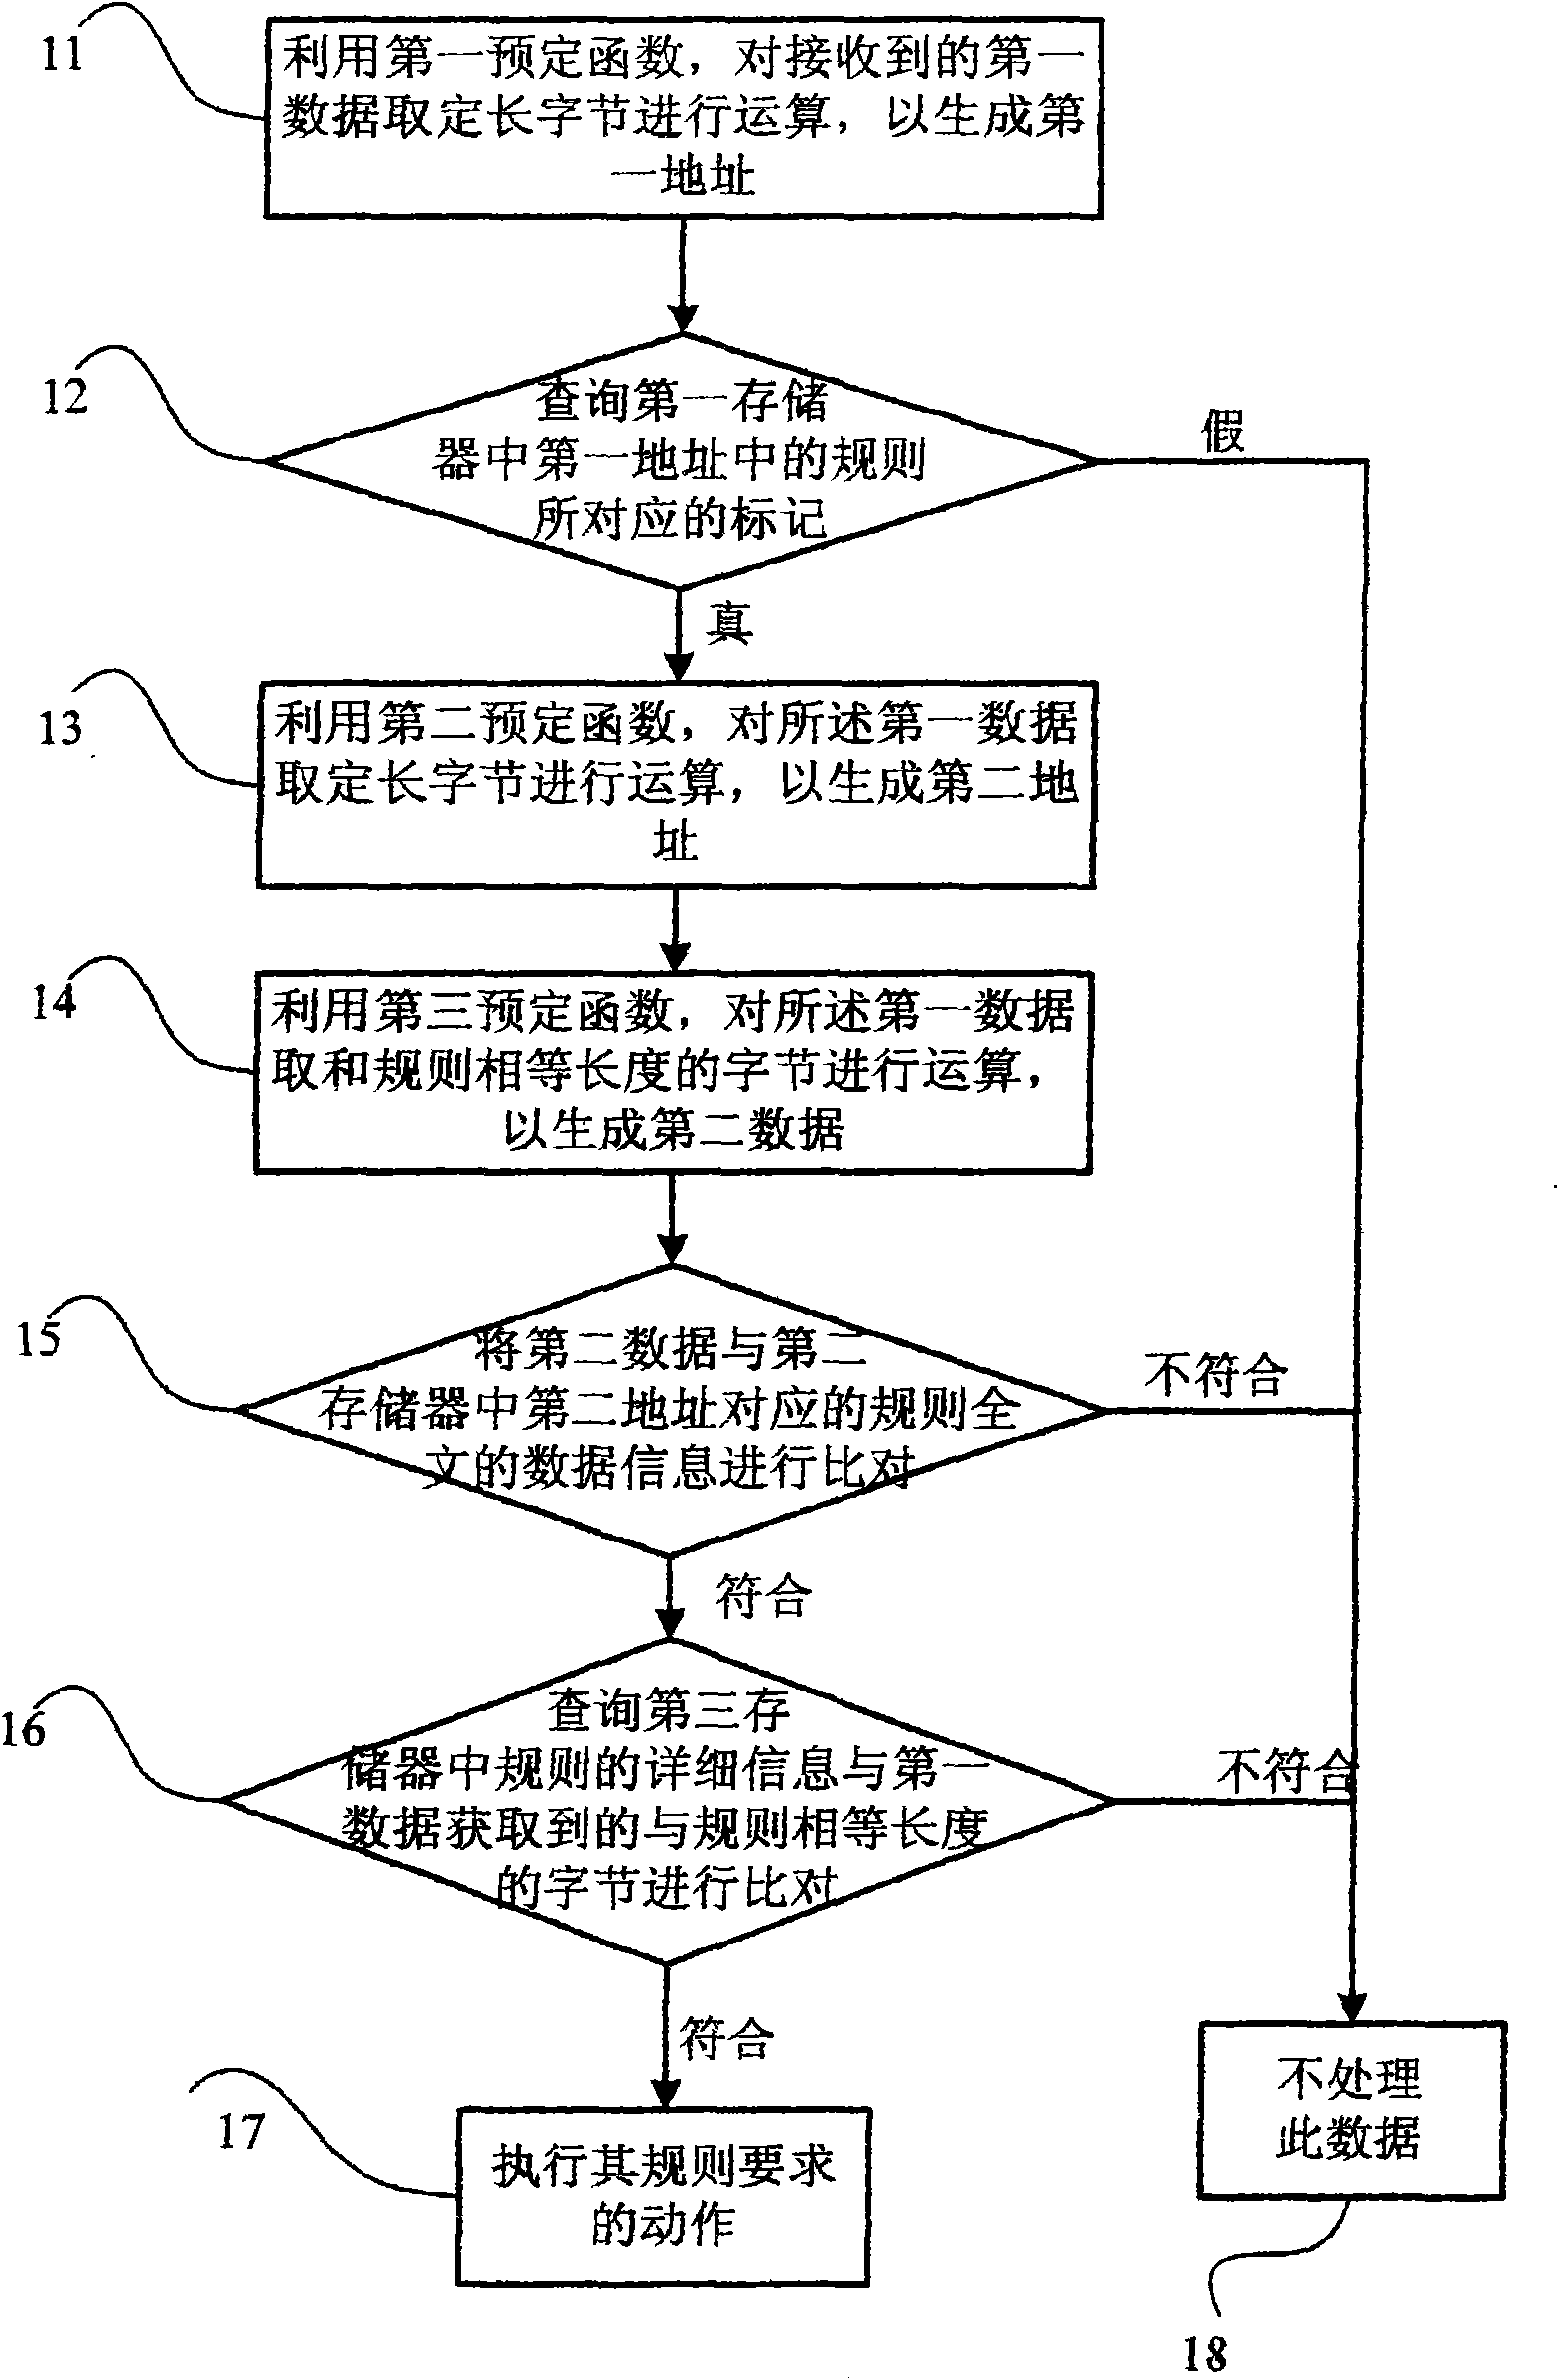 Method and system for processing data search